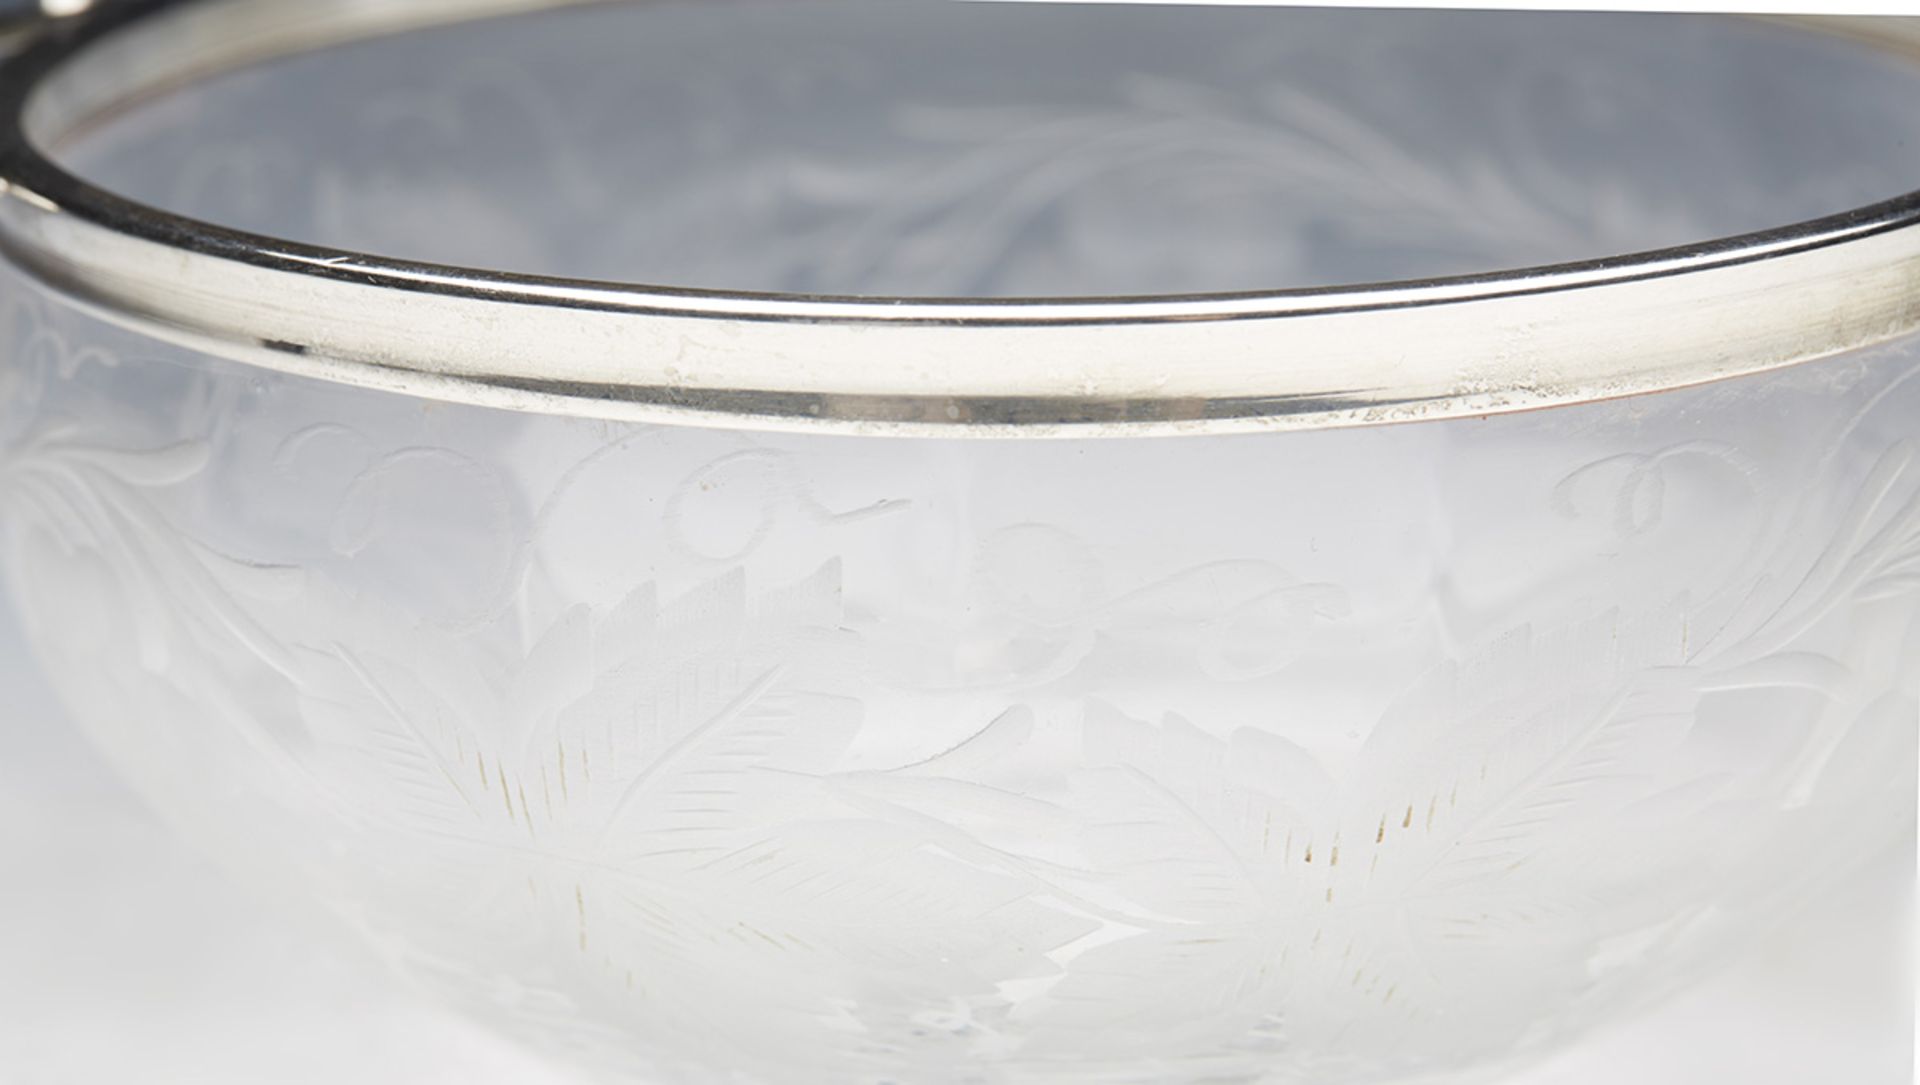 Fine Antique American Silver Mounted Engraved Glass Bowl 19Th C. - Image 2 of 9